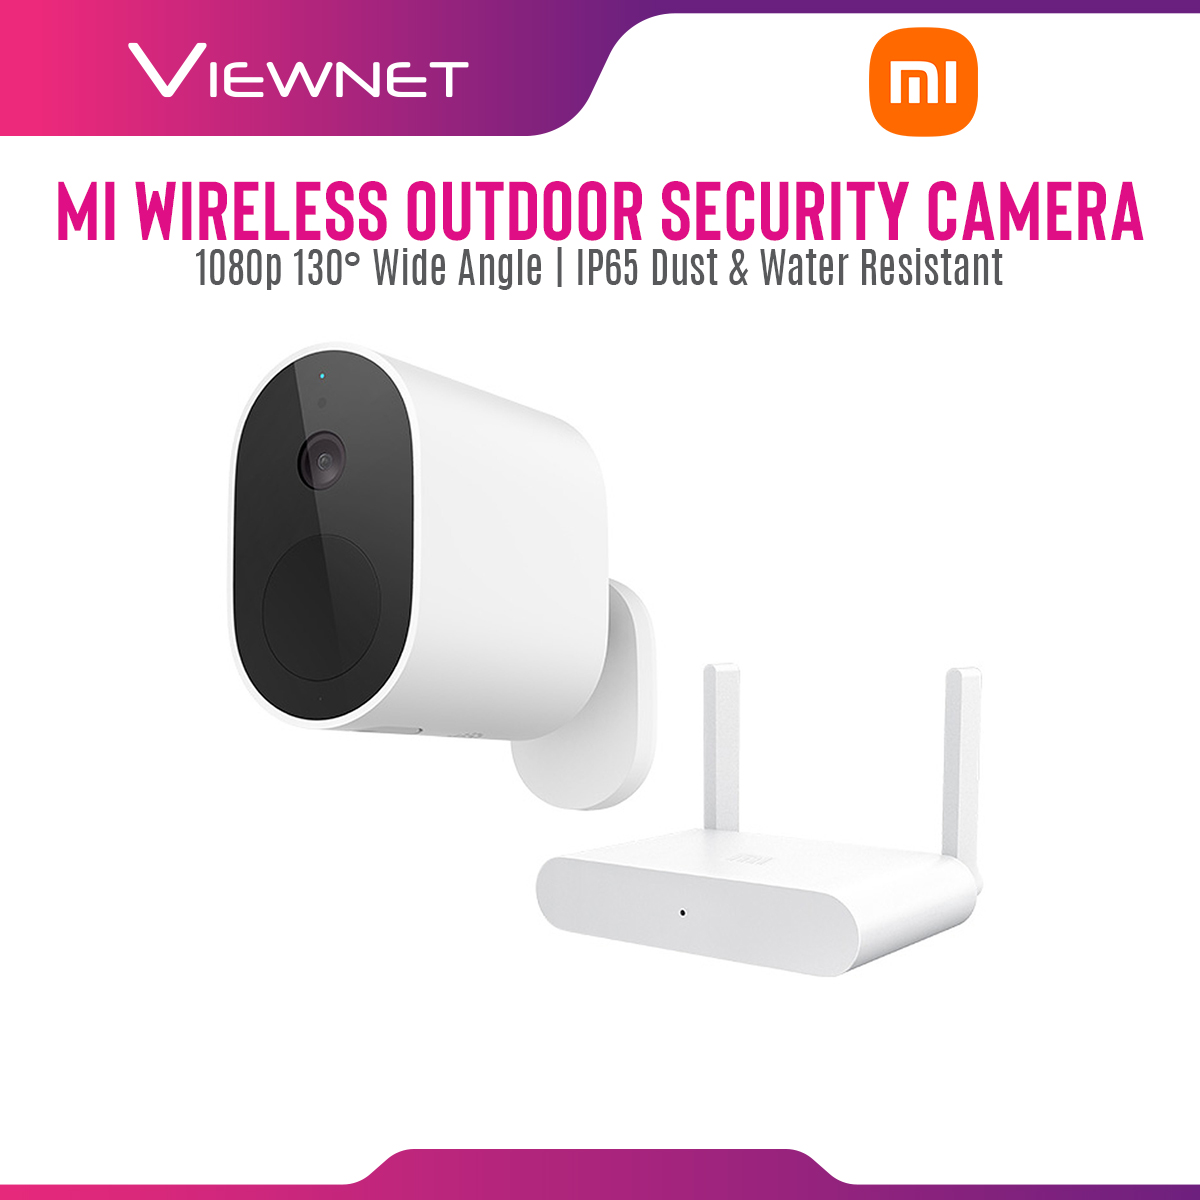 Xiaomi Wireless Outdoor Security Camera 1080p with IP63 Dust and Water Resistant, 130Â° Wide Angle, PIR Human Detection